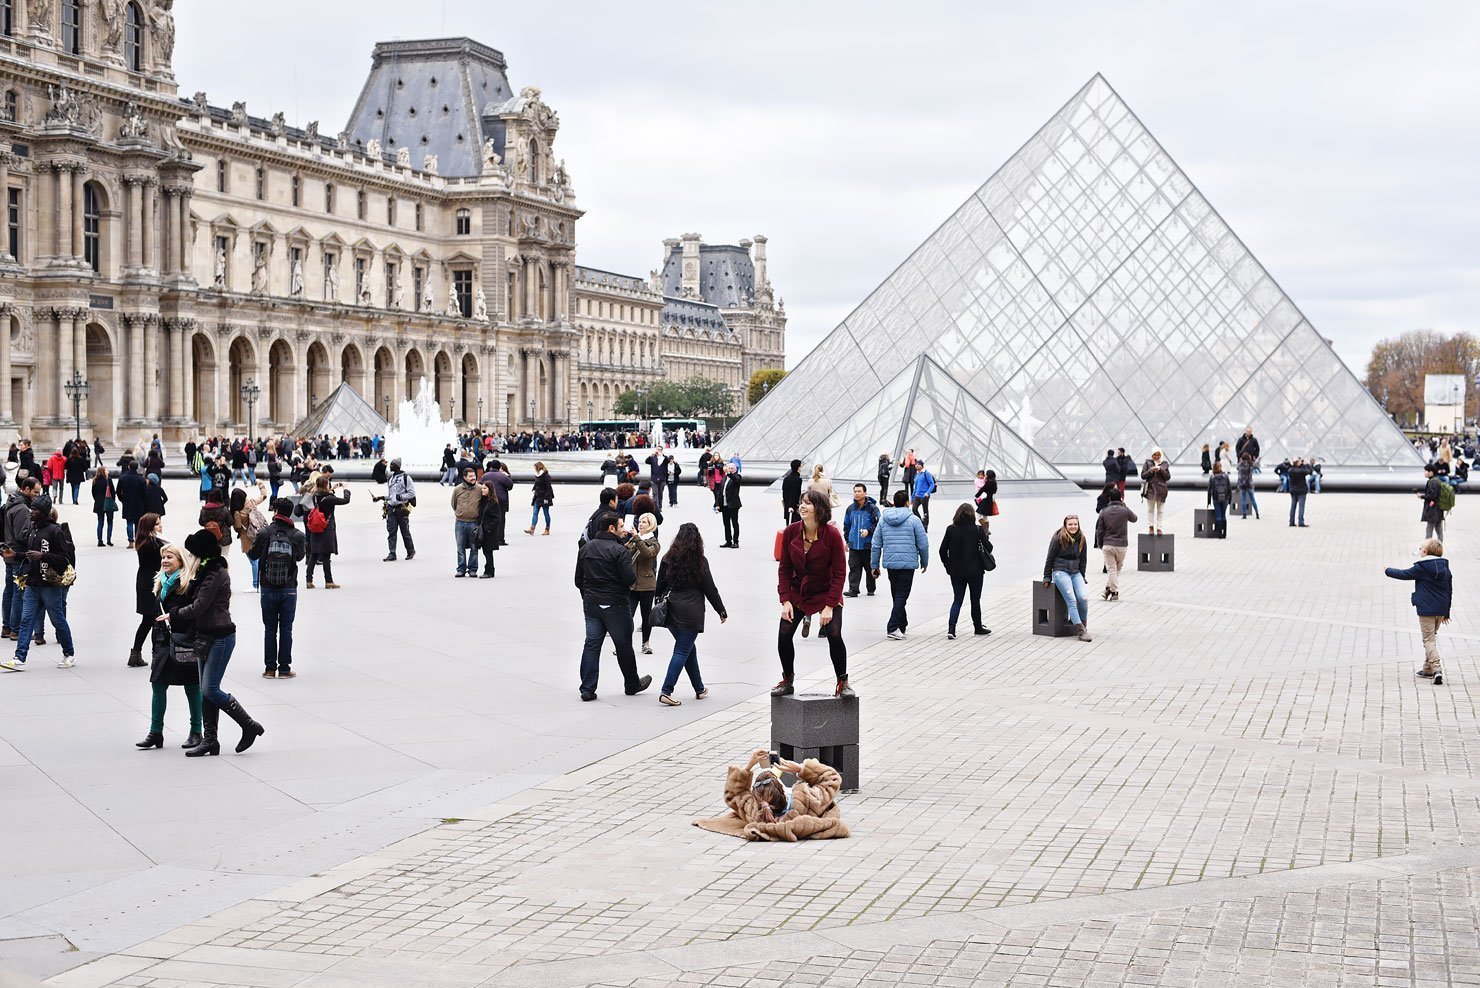 People posing in front of the Louvre in Paris.